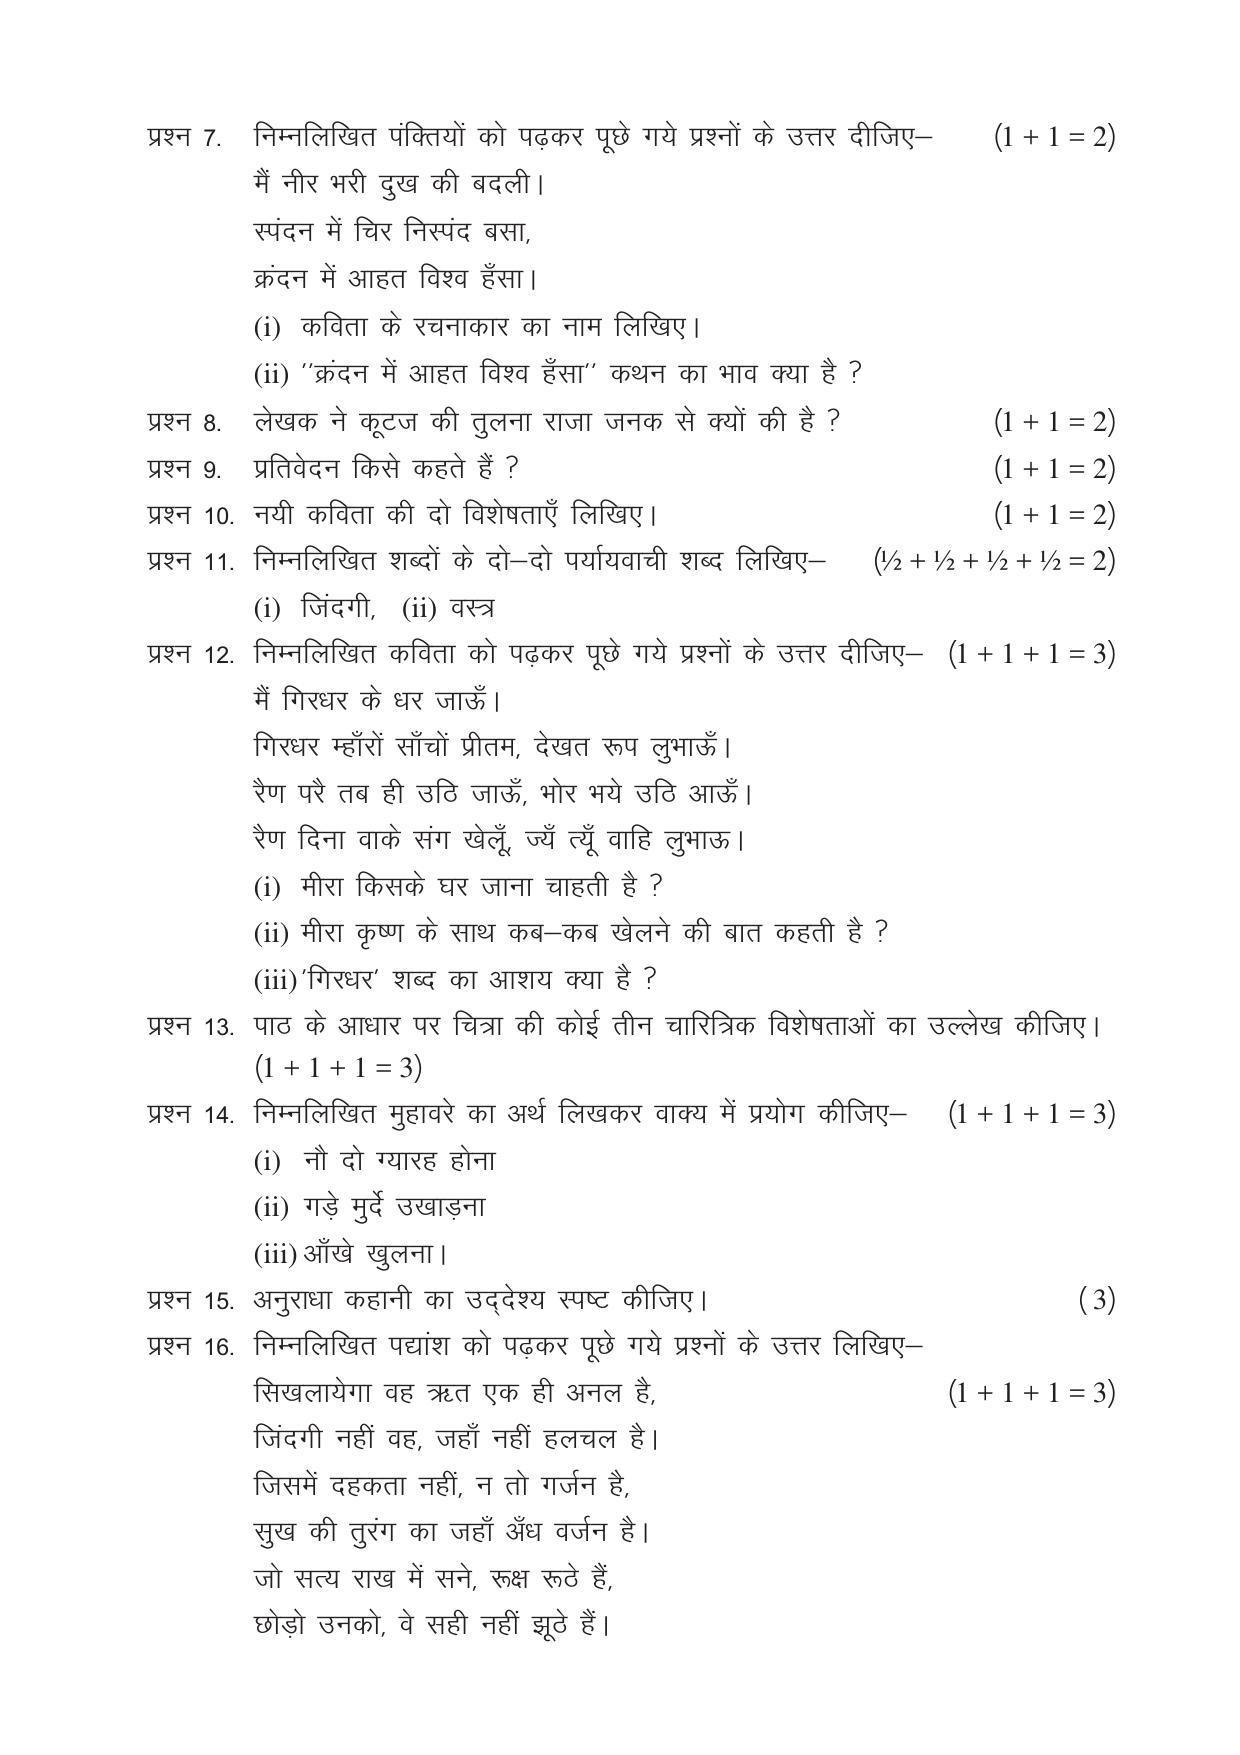 CGSOS Class 12 Model Question Paper - Hindi - II - Page 3